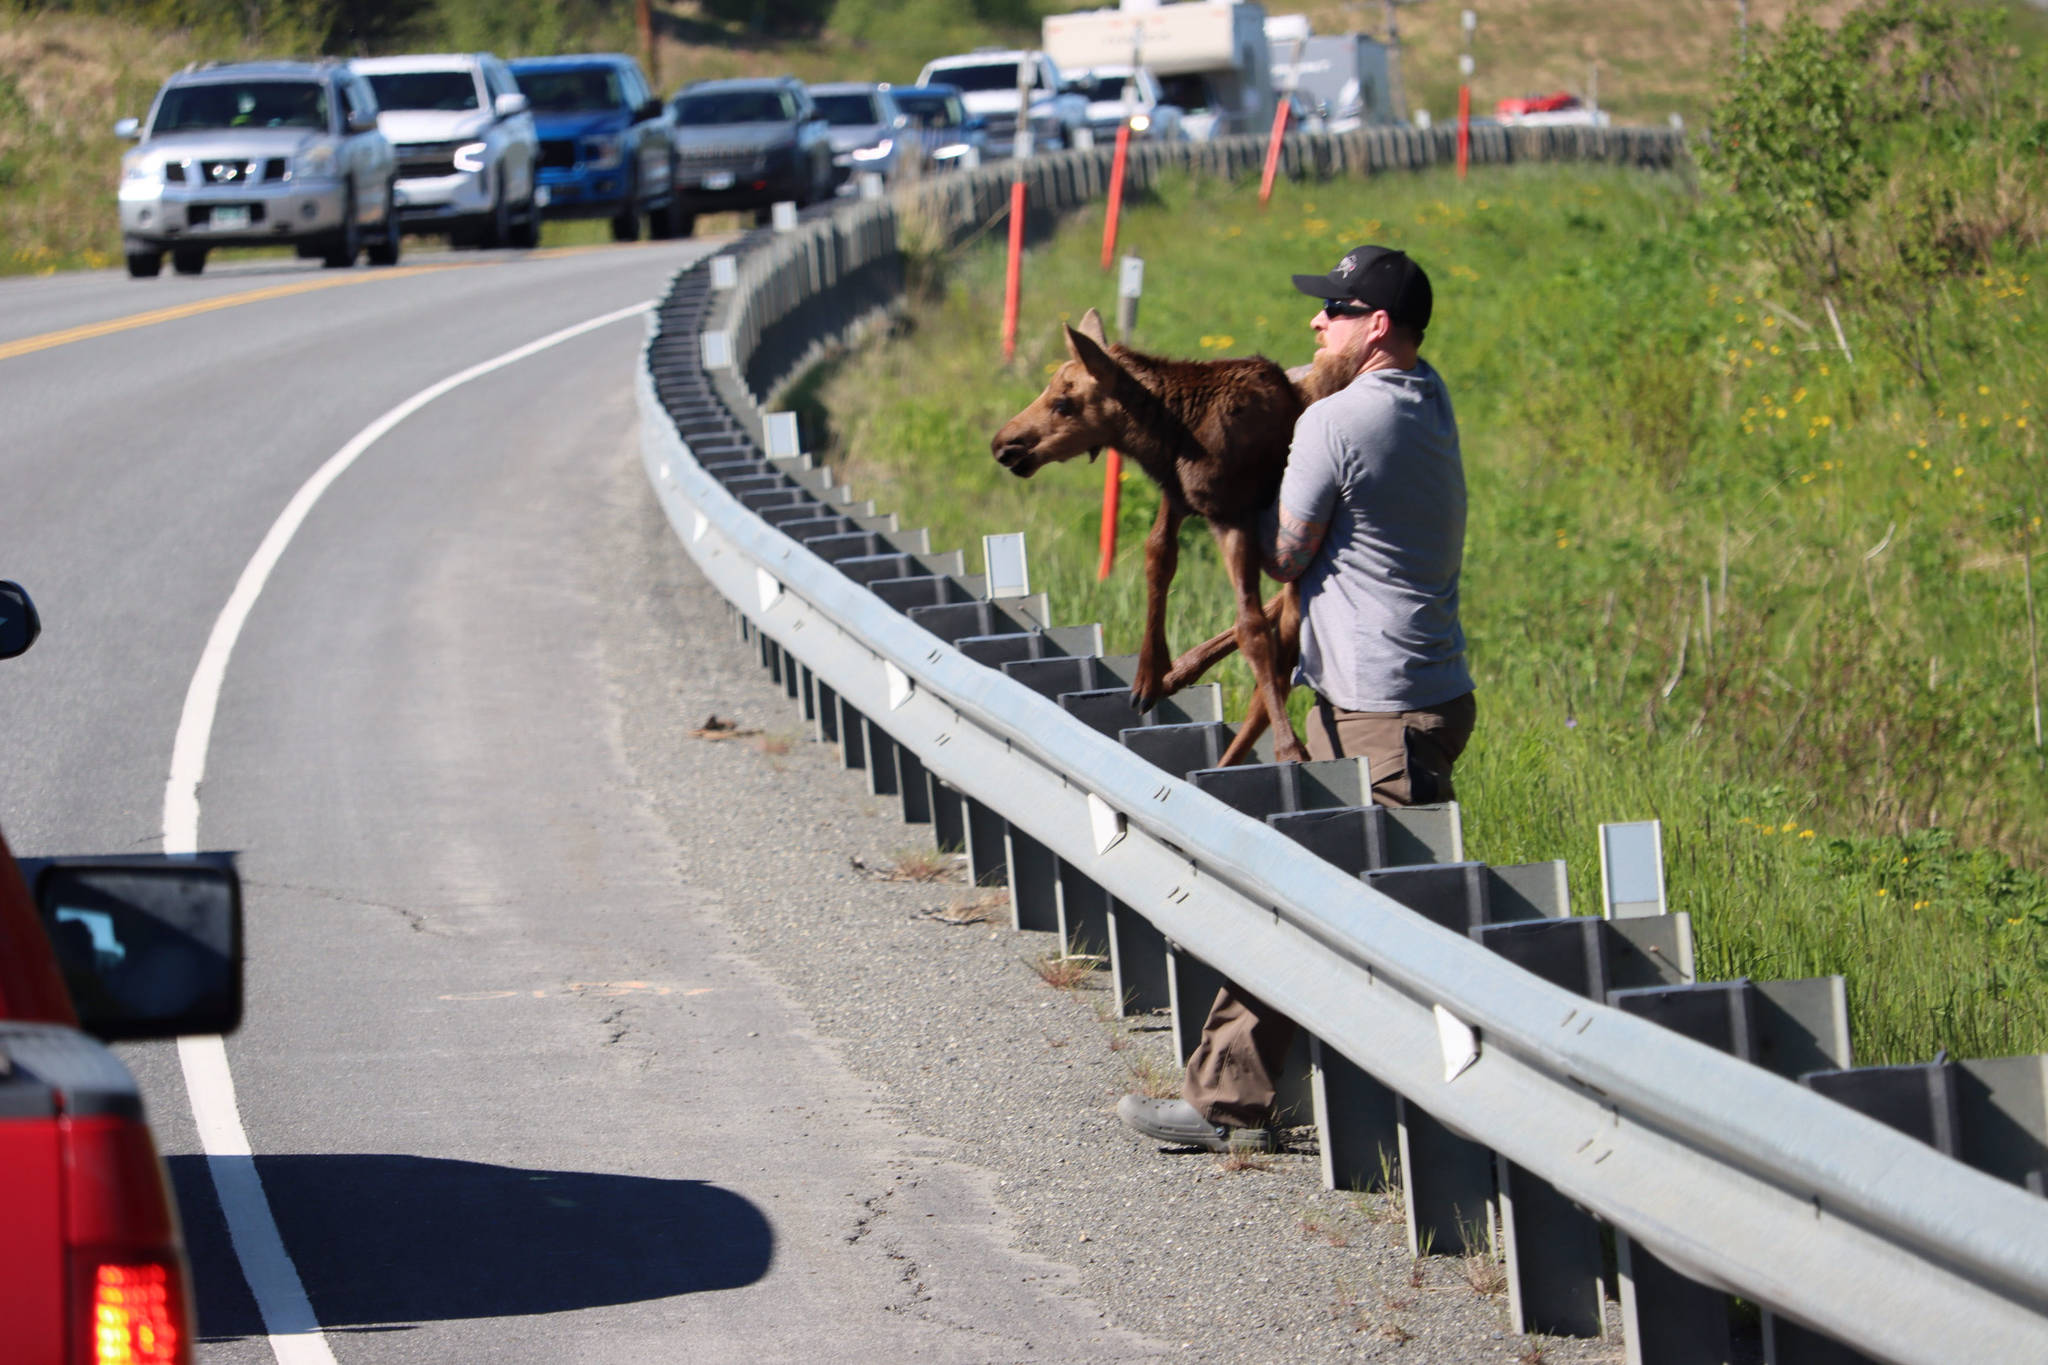 Anchorage man Joe Tate lifts a moose calf over the railing on the Sterling Highway near Clam Gulch on Sunday, June 6, 2021. (Photo by Andie Bock/courtesy)